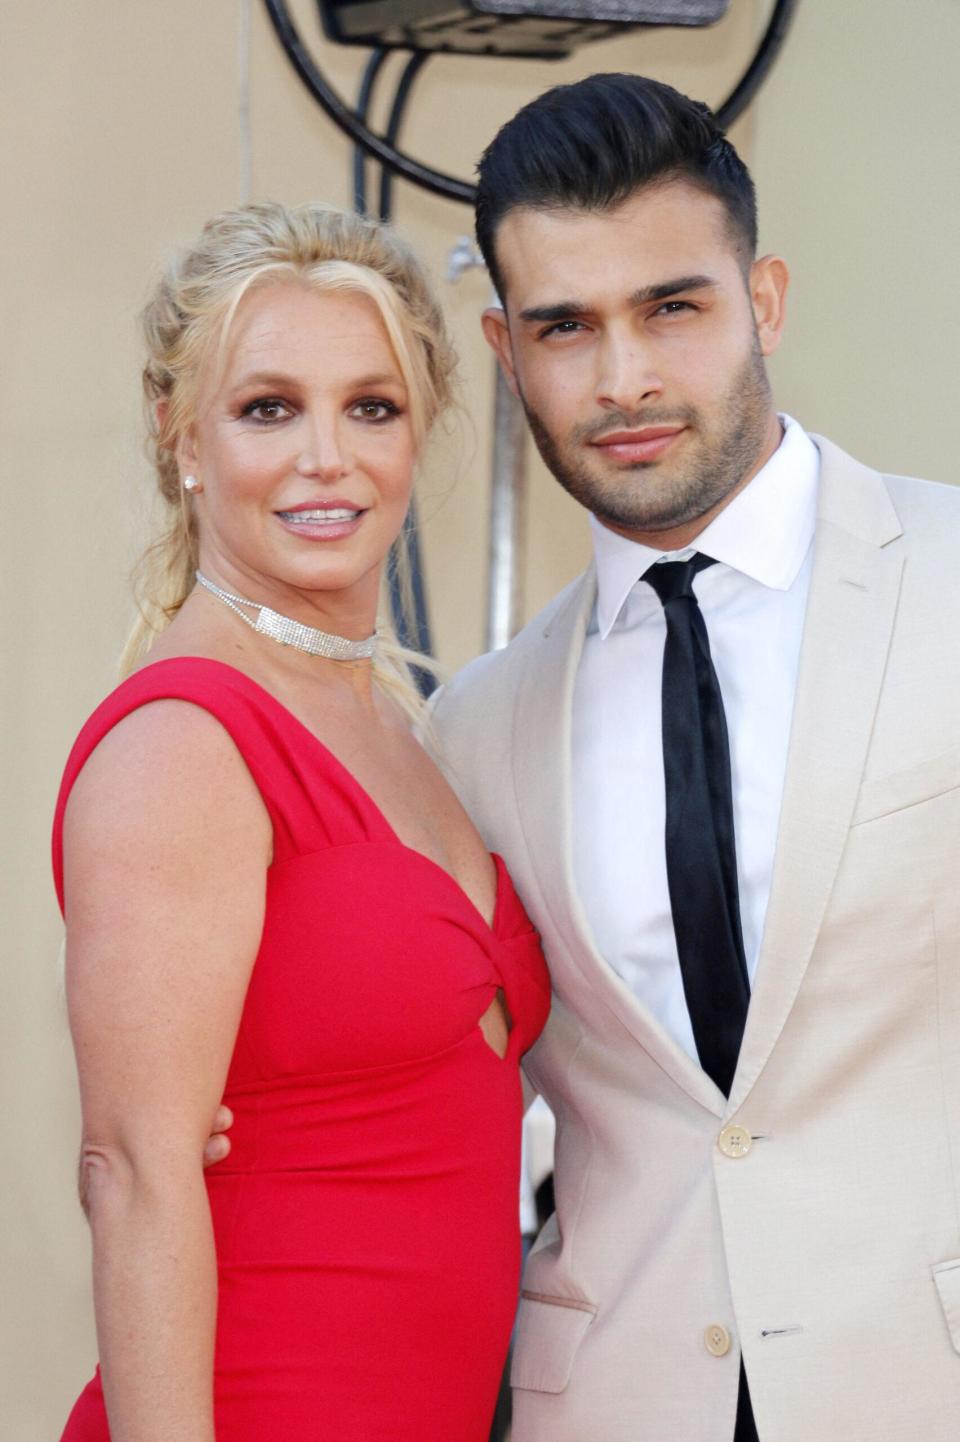 Sam Asghari and Britney Spears at Los Angeles premiere of 'Once Upon a Time In Hollywood'